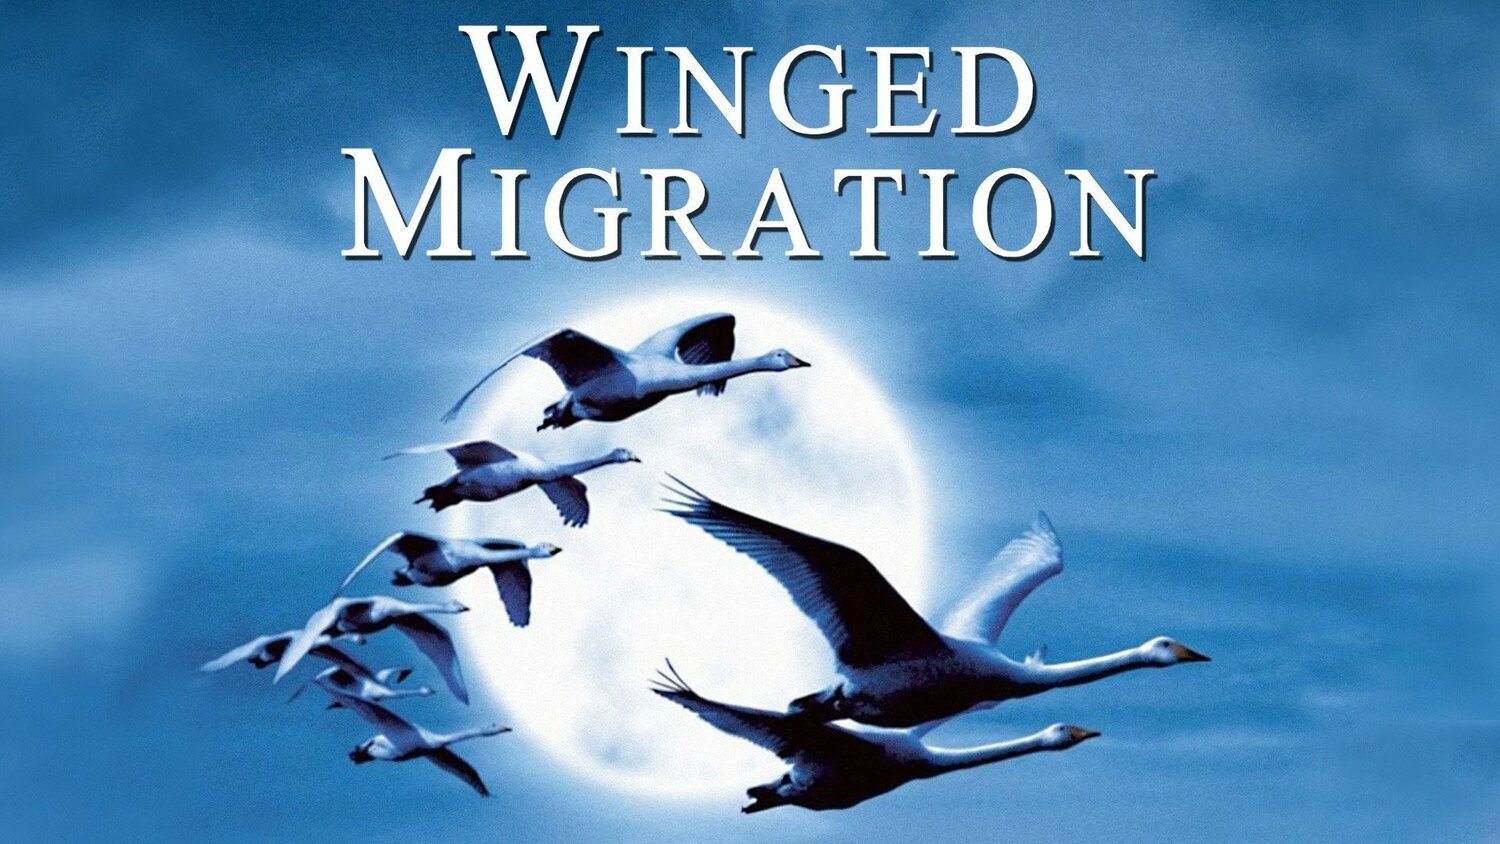 “Winged Migration”